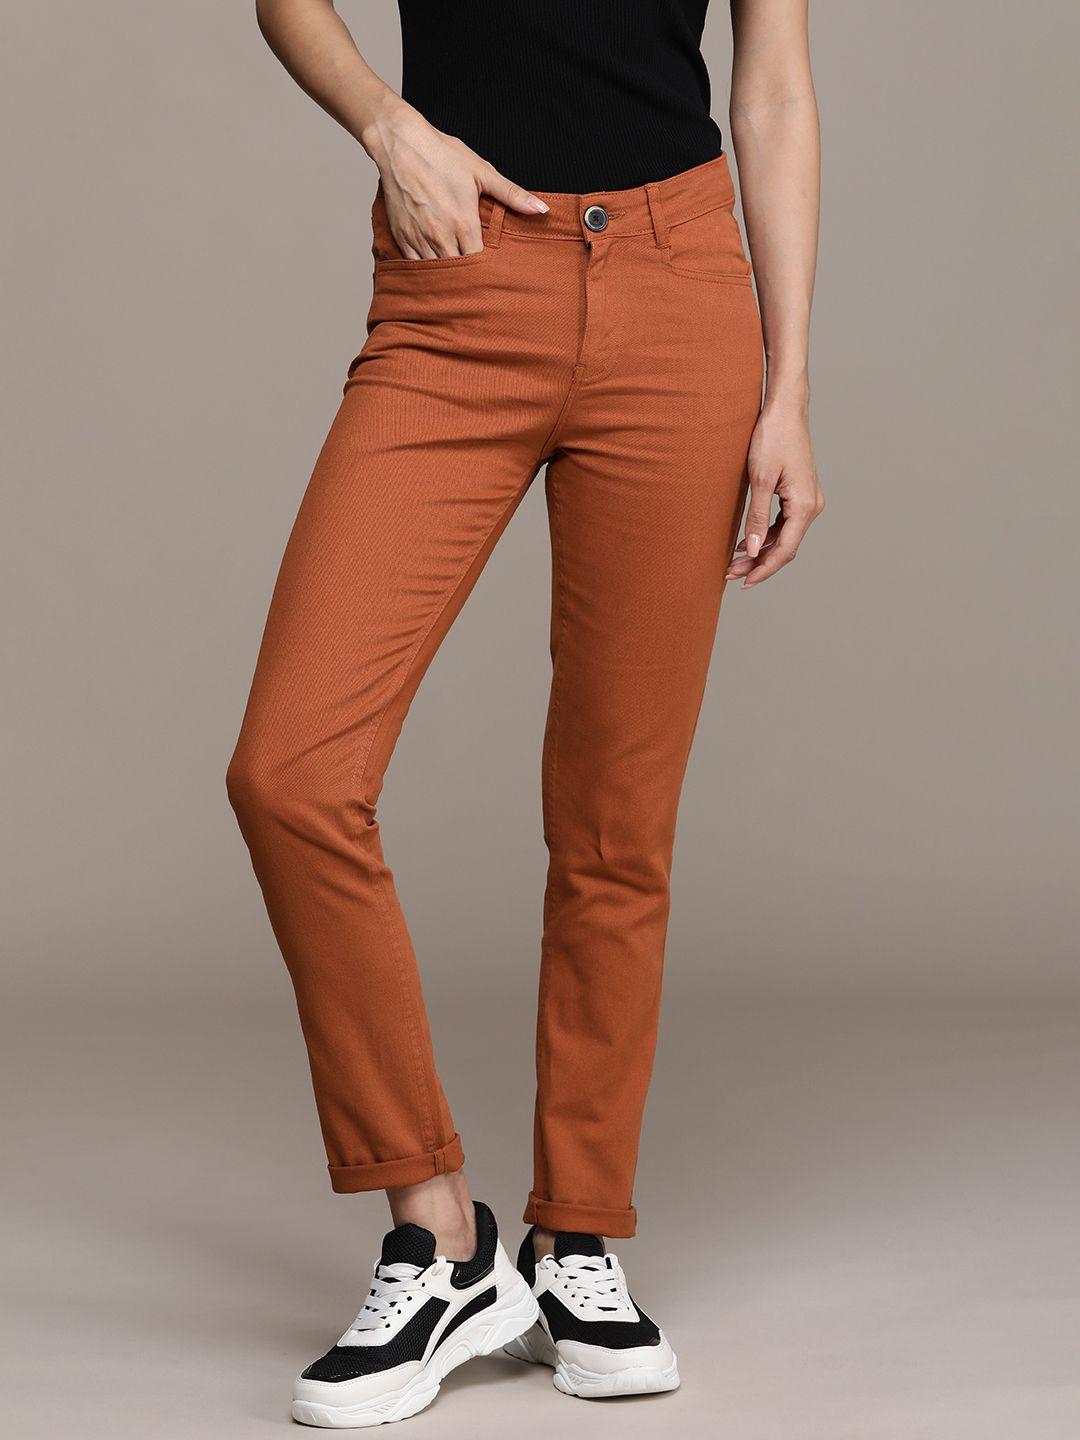 roadster-women-classic-slim-fit-low-rise-chinos-trousers